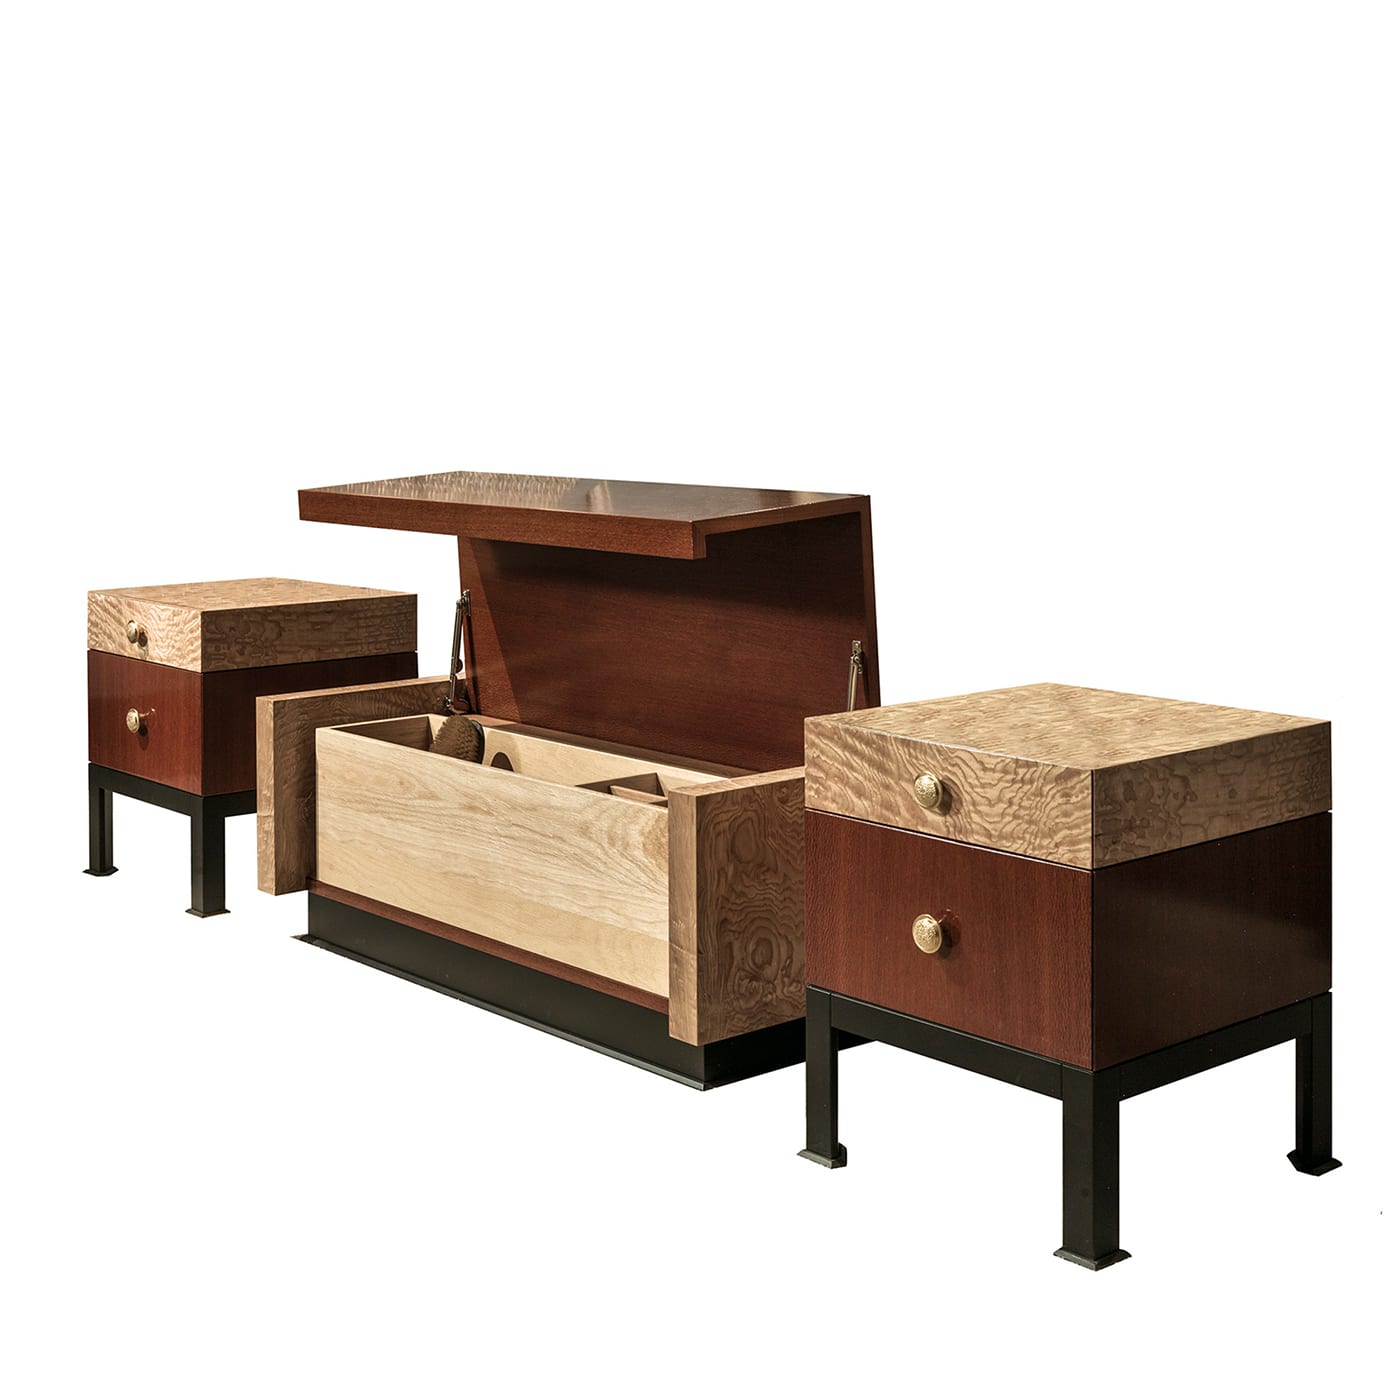 Artesian Crafted Small Storage Boxes Single Drawer Oak Rosewood